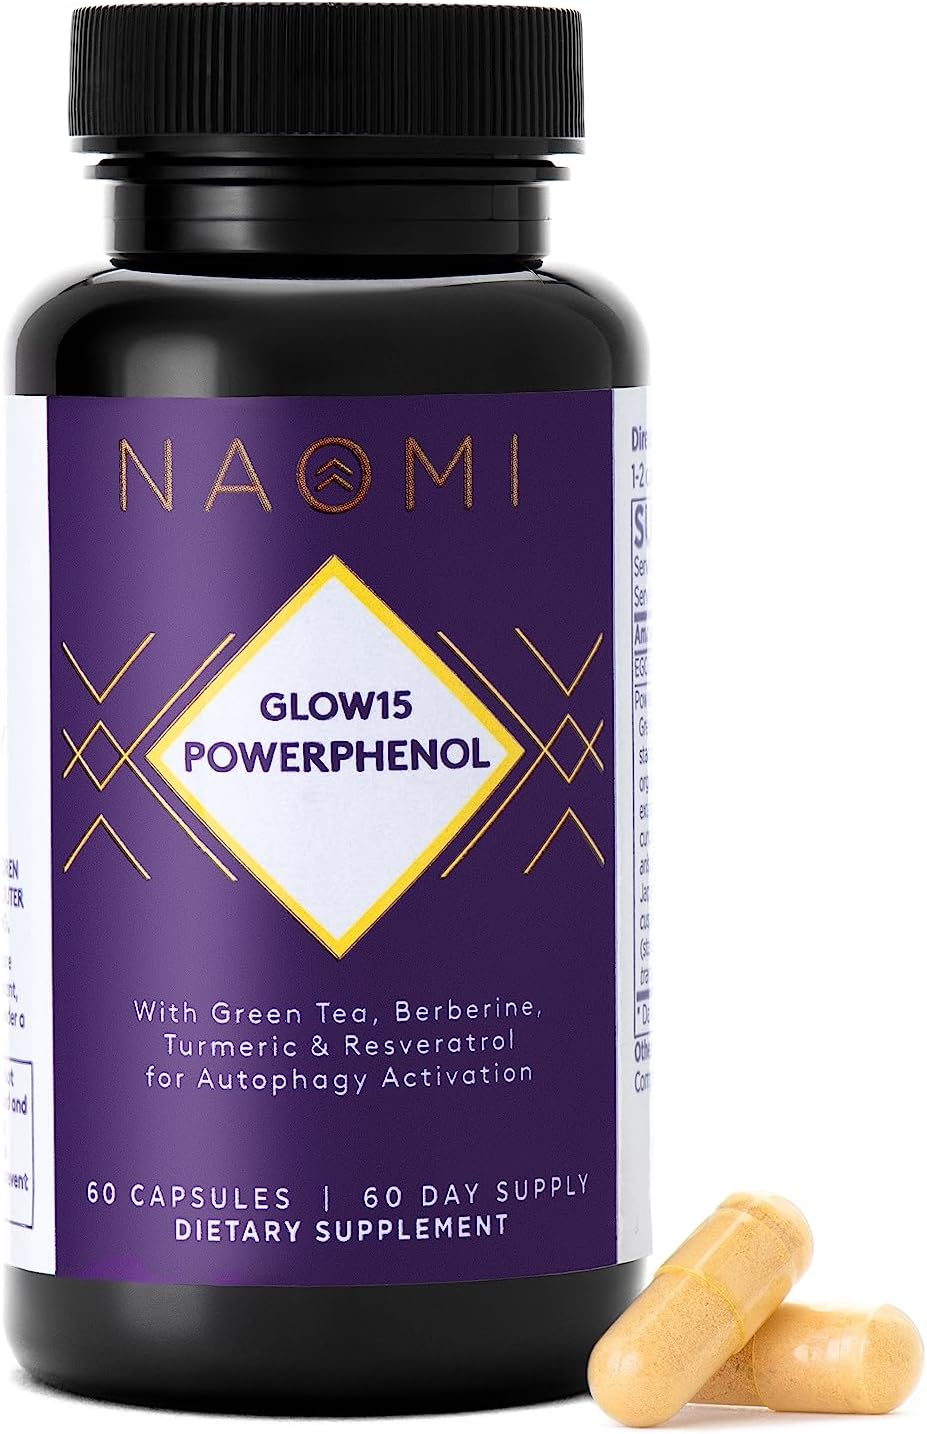 NAOMI PowerPhenol - Polyphenols Supplement, Green Tea, Berberine, Turmeric and Resveratrol - Supports Immunity, Healthy Weight and Aging, Joint Strength, and Energy Levels - 60 Count, 60-Day Supply